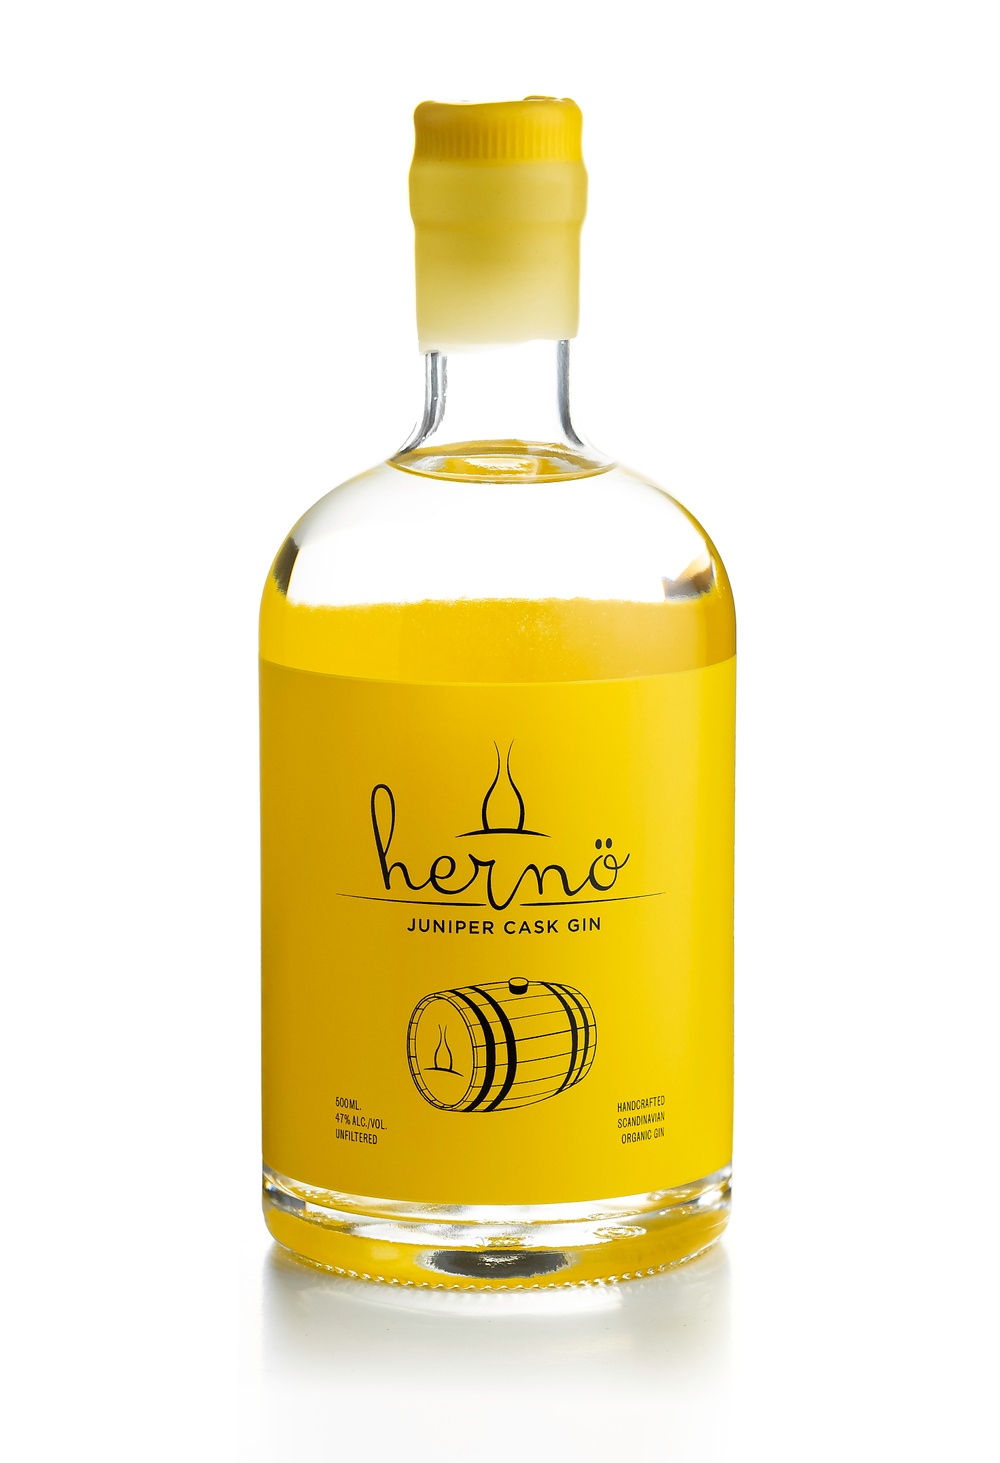 Hernö Juniper Cask Gin, the first gin in the world matured on juniper wood casks, is made from the same distilled gin as Hernö Gin, diluted to 47% ABV and gently matured for 30 days in juniper wood casks. The maturity gives more intense juniper notes finished with a long harmonious hint of citrus peel.